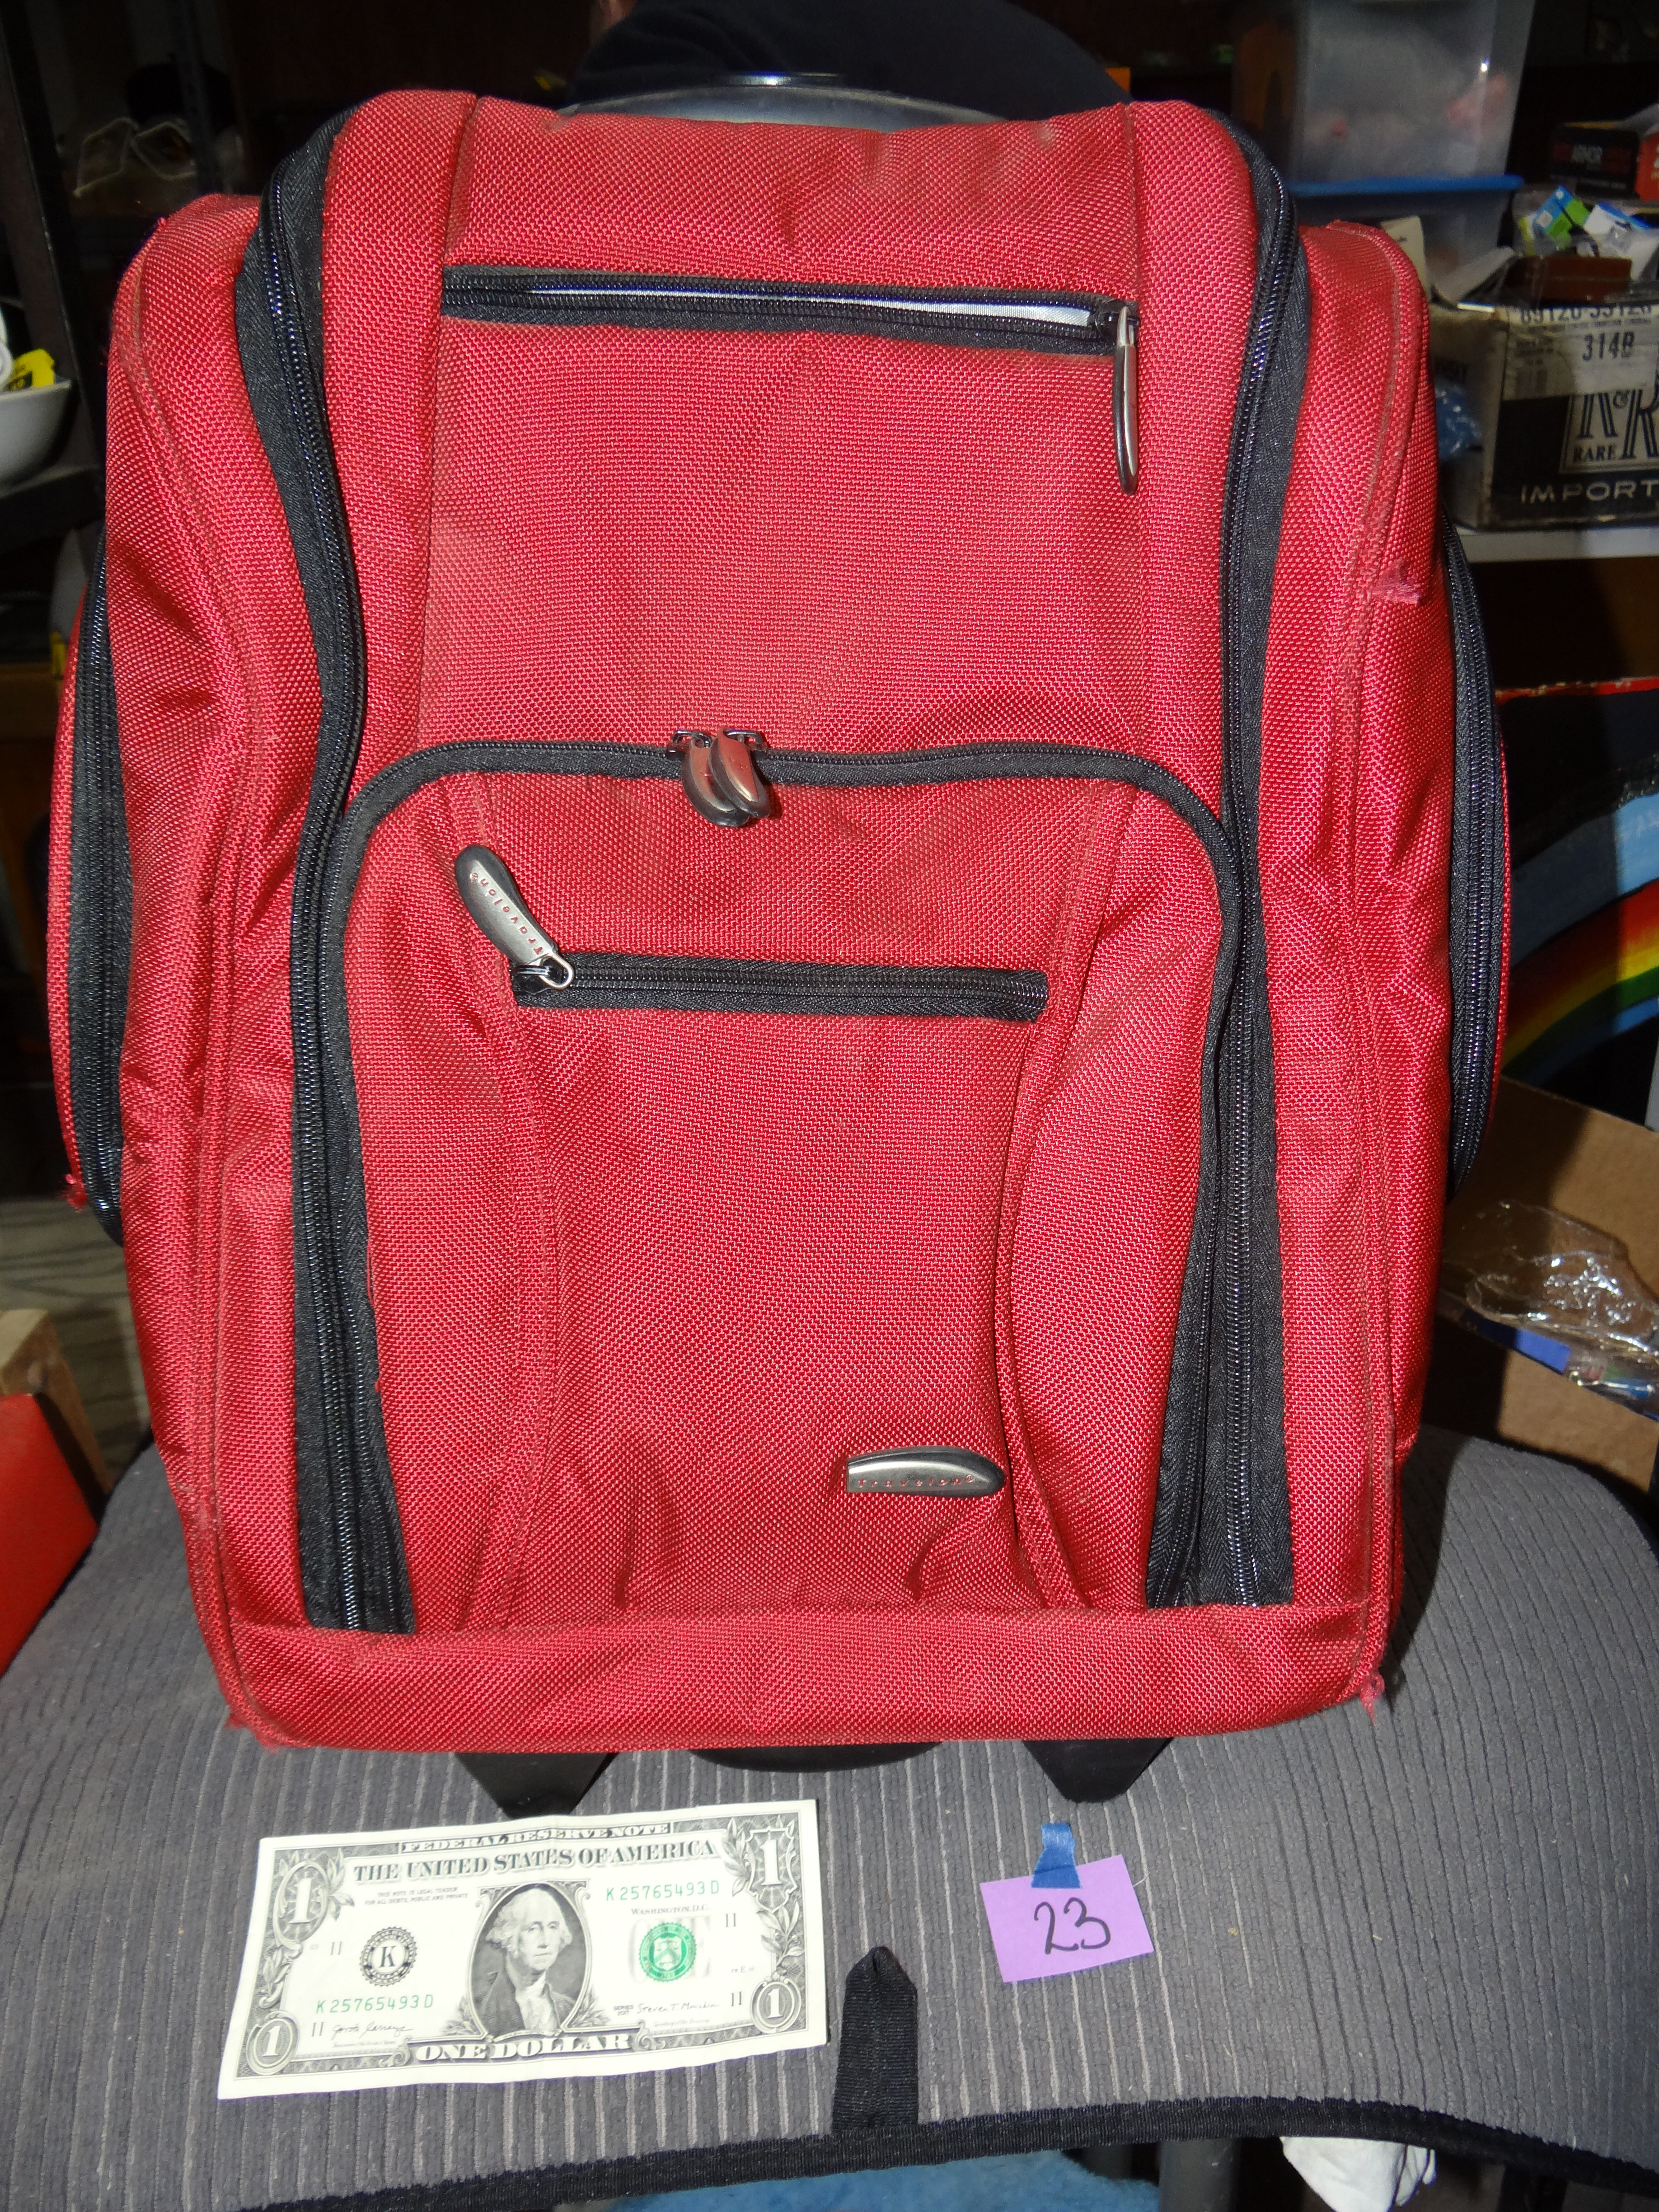 23-Red & Black Small Travel Bag w/ Extendible Handle & Wheels